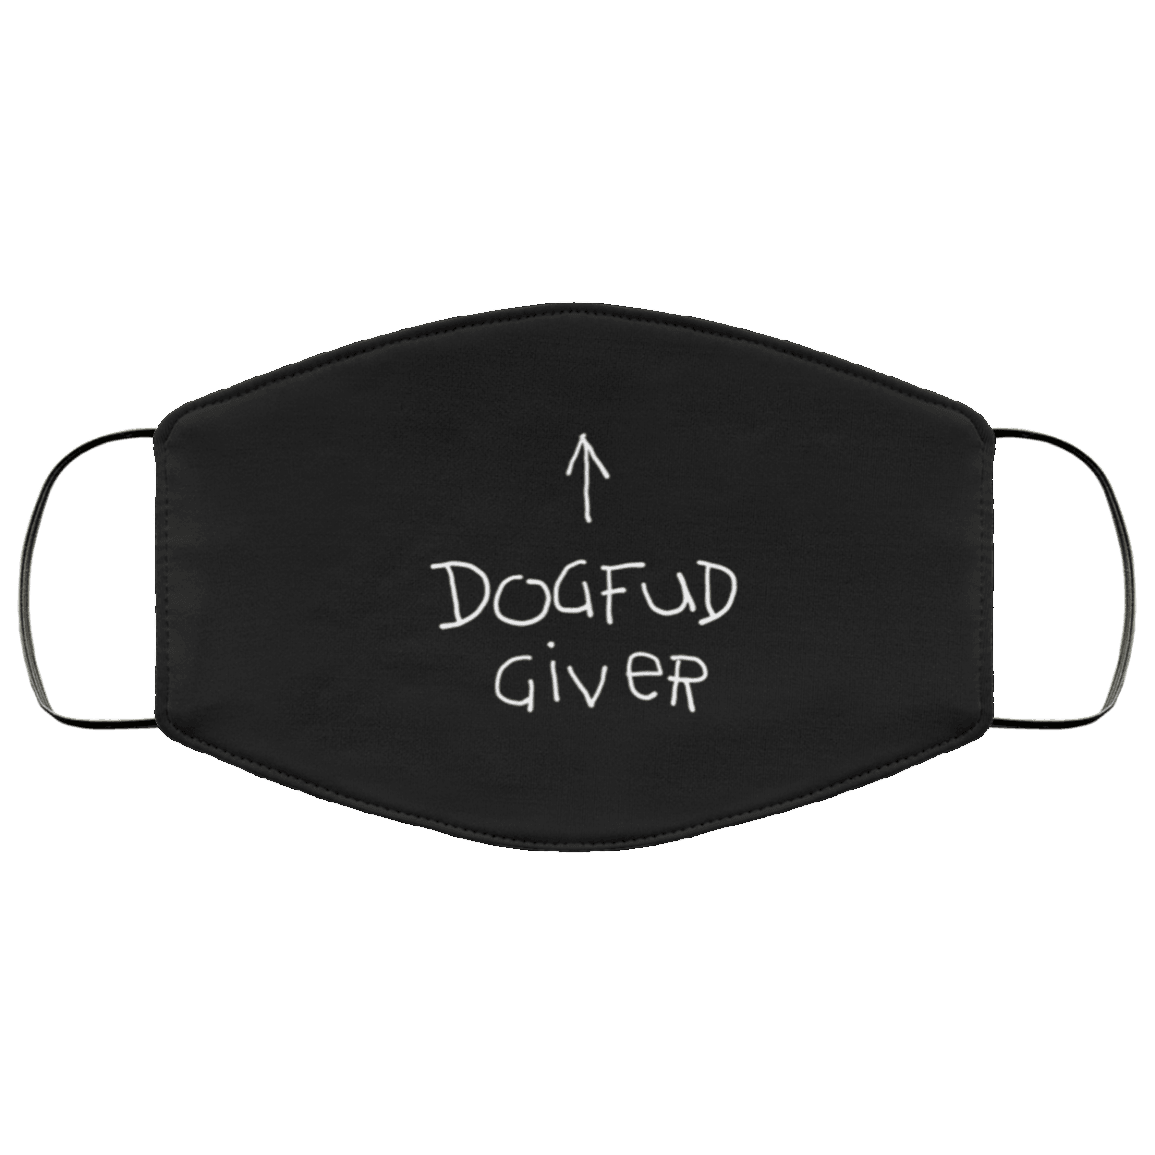 Designs by MyUtopia Shout Out:Dogfud Giver Humor Adult Fabric Face Mask with Elastic Ear Loops,3 Layer Fabric Face Mask / Black / Adult,Fabric Face Mask